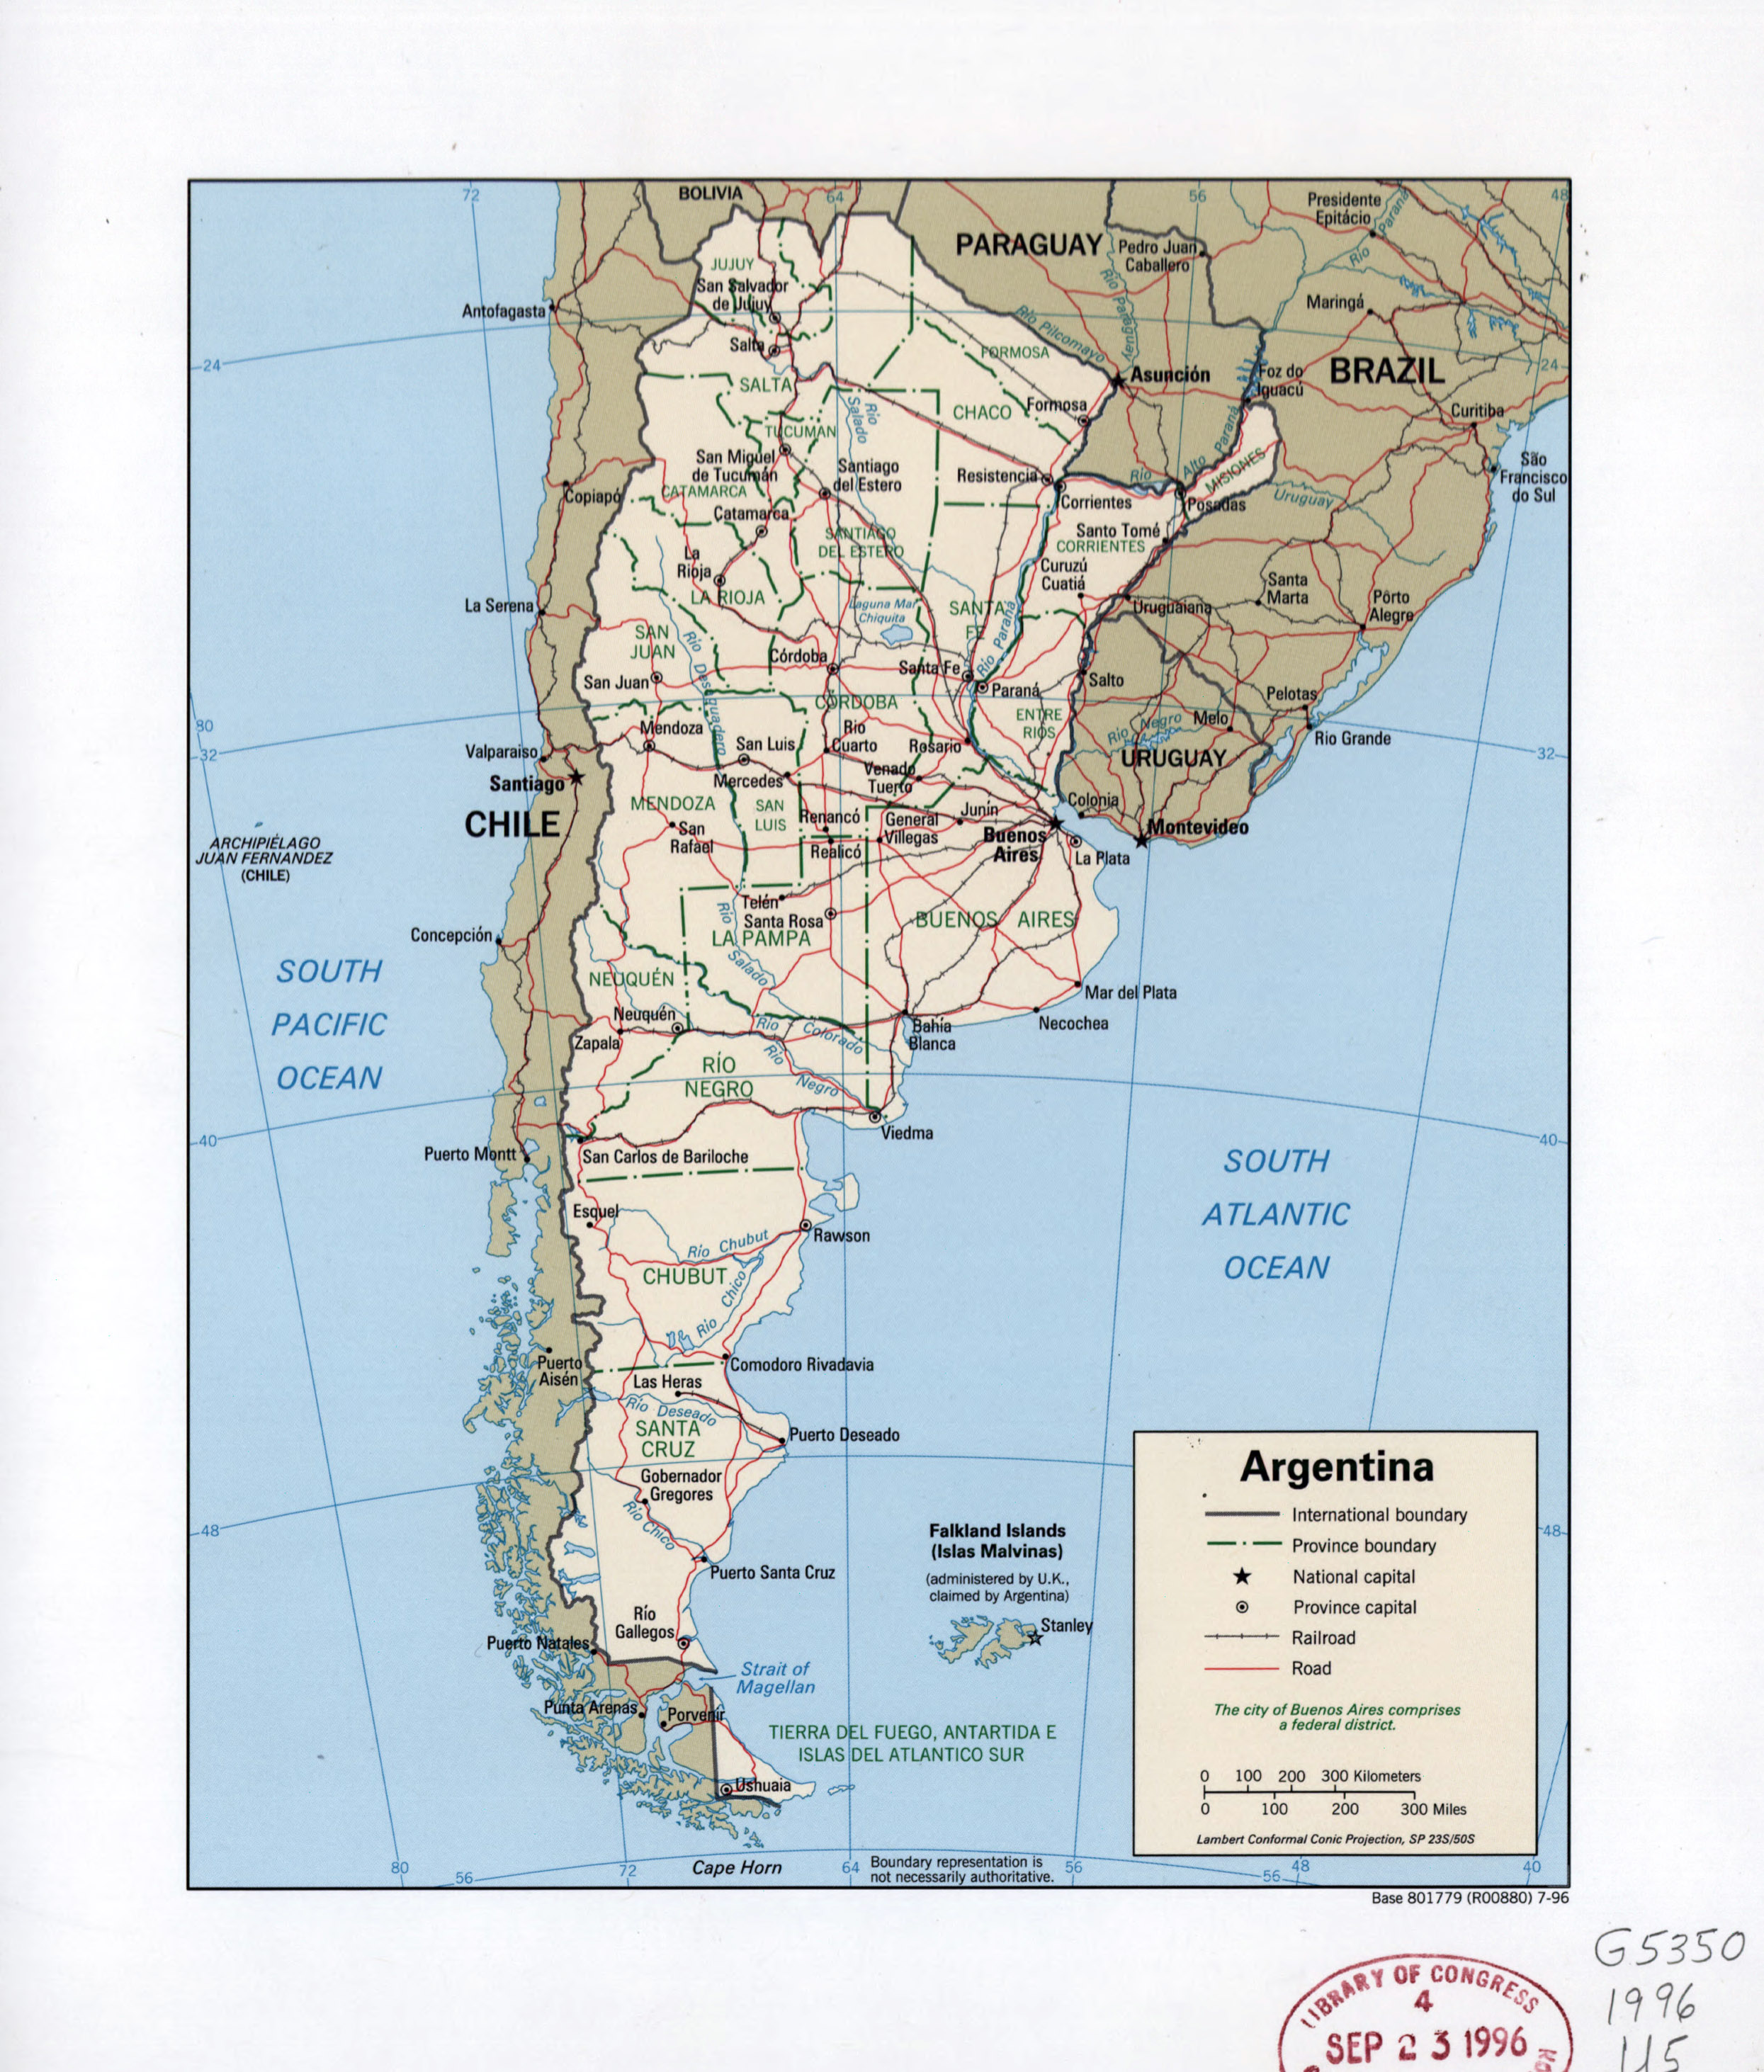 Large Detailed Political And Administrative Map Of Argentina With Roads Railroads Cities And Major Cities 1996 Argentina South America Mapsland Maps Of The World